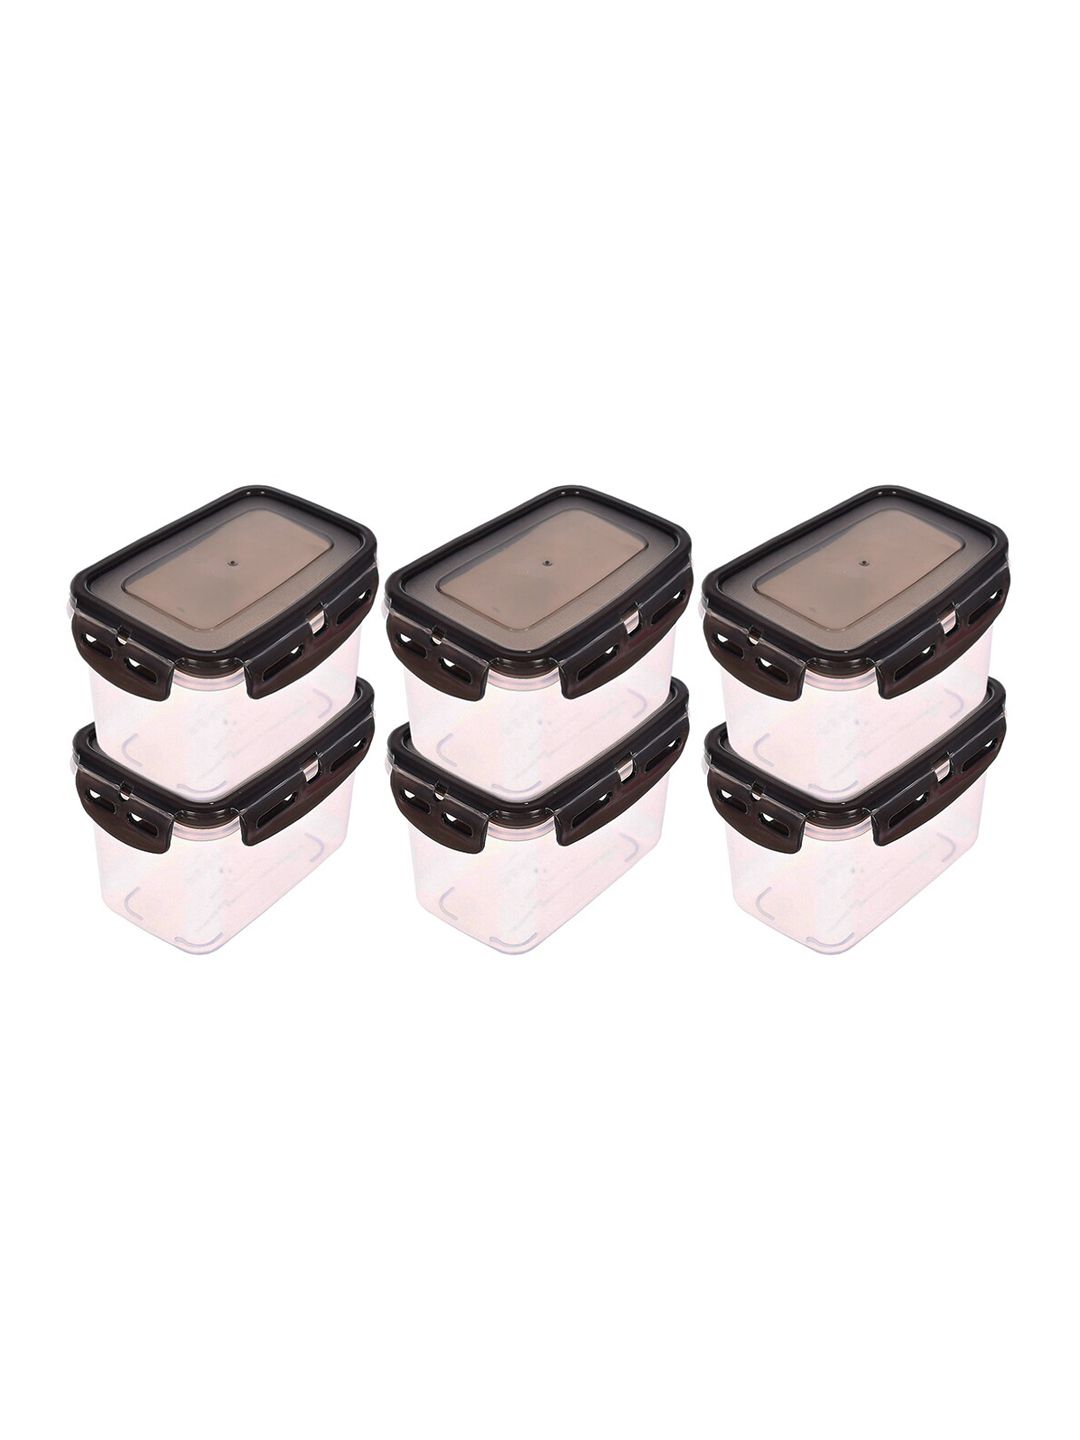 Kuber Industries Set of 6 Black & Transparent Solid Food Container Price in India